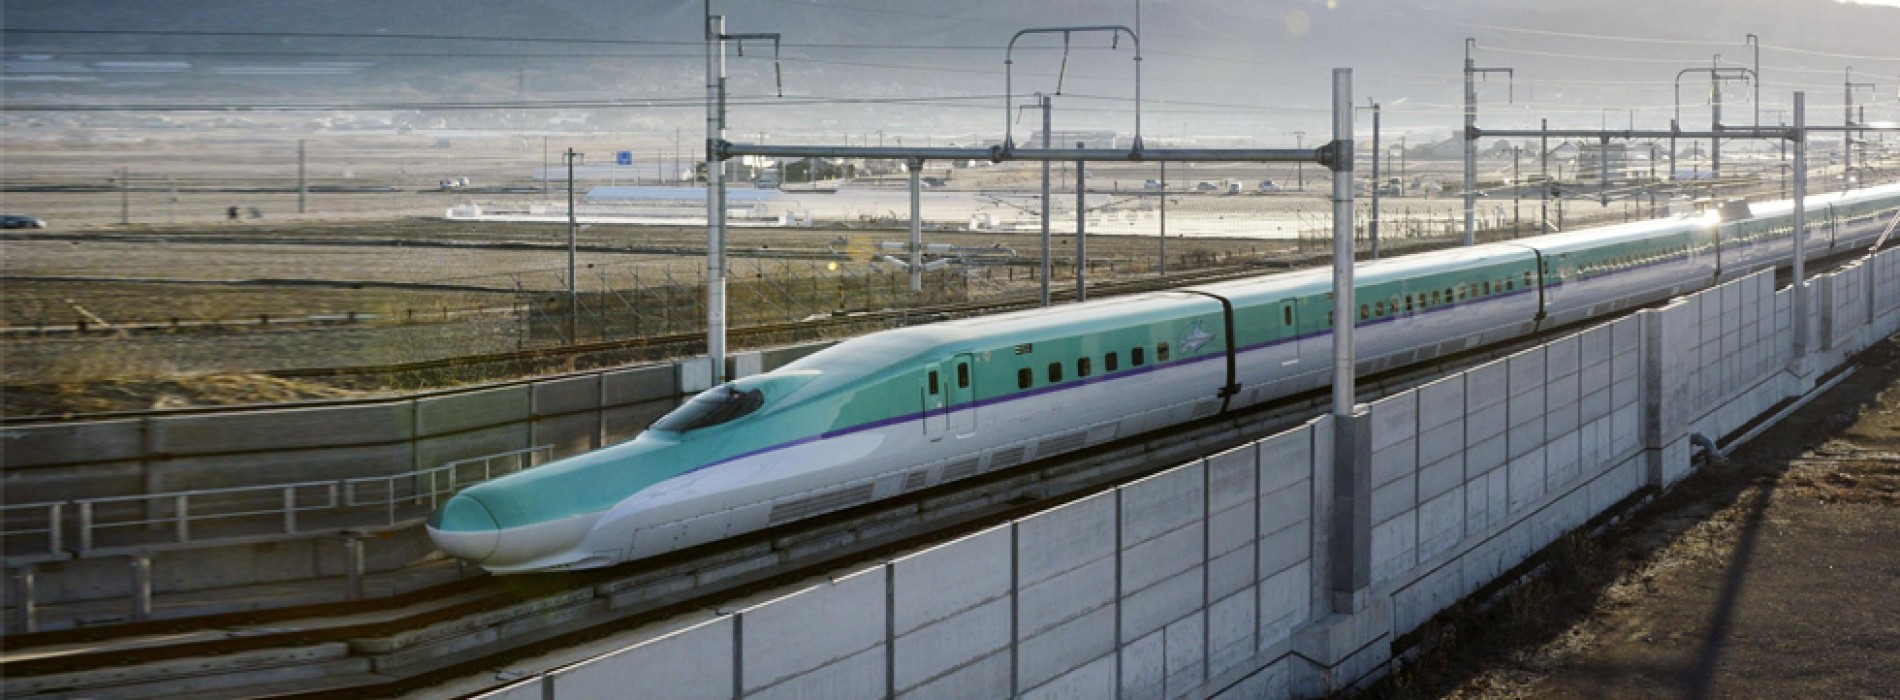 What can you expect from the much awaited Bullet Train?